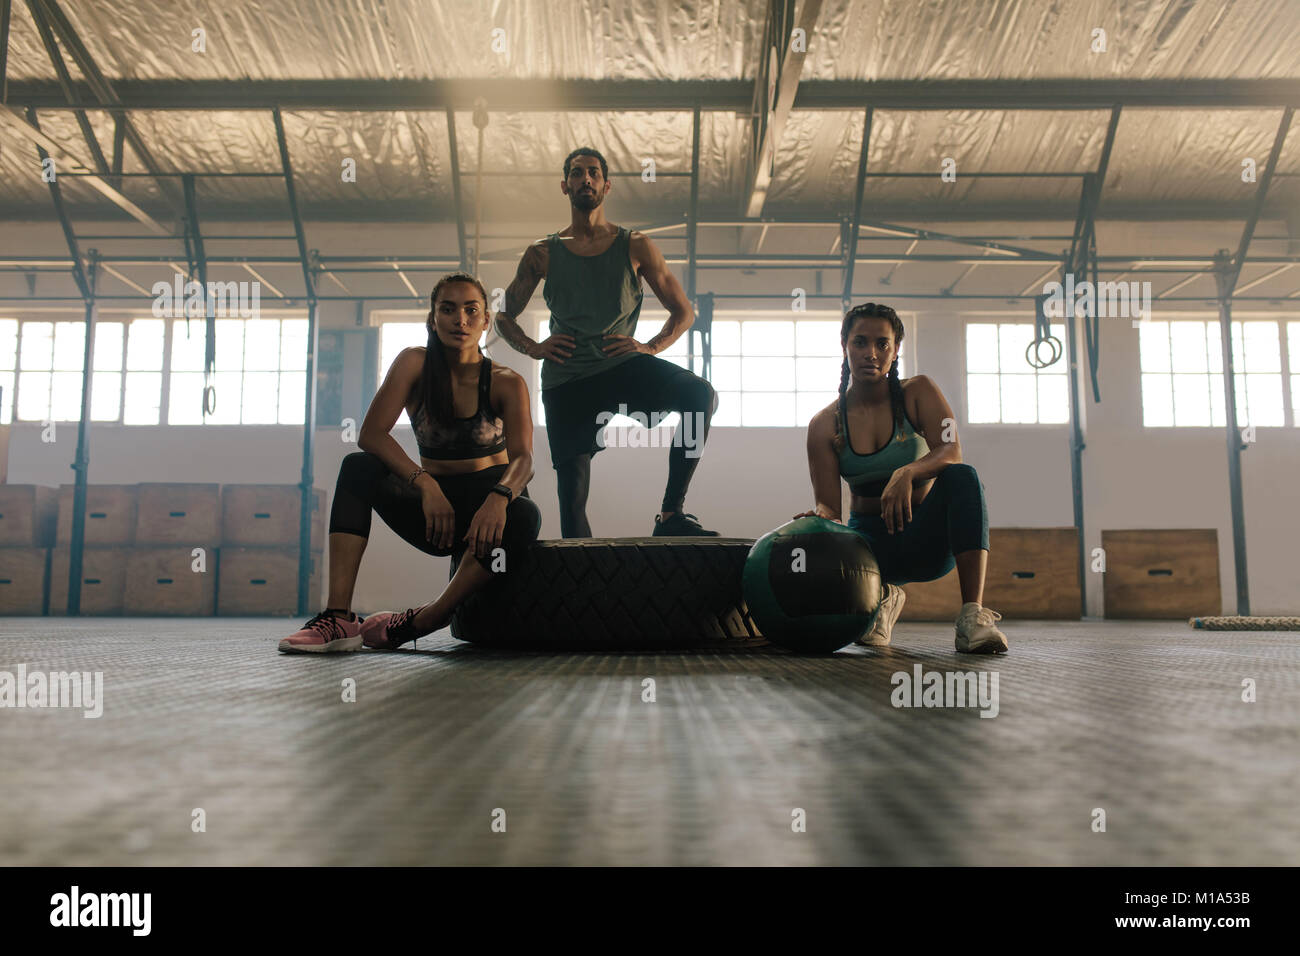 Portrait of three young people resting and looking at camera after training session in gym. Small group of people after training at health club. Stock Photo